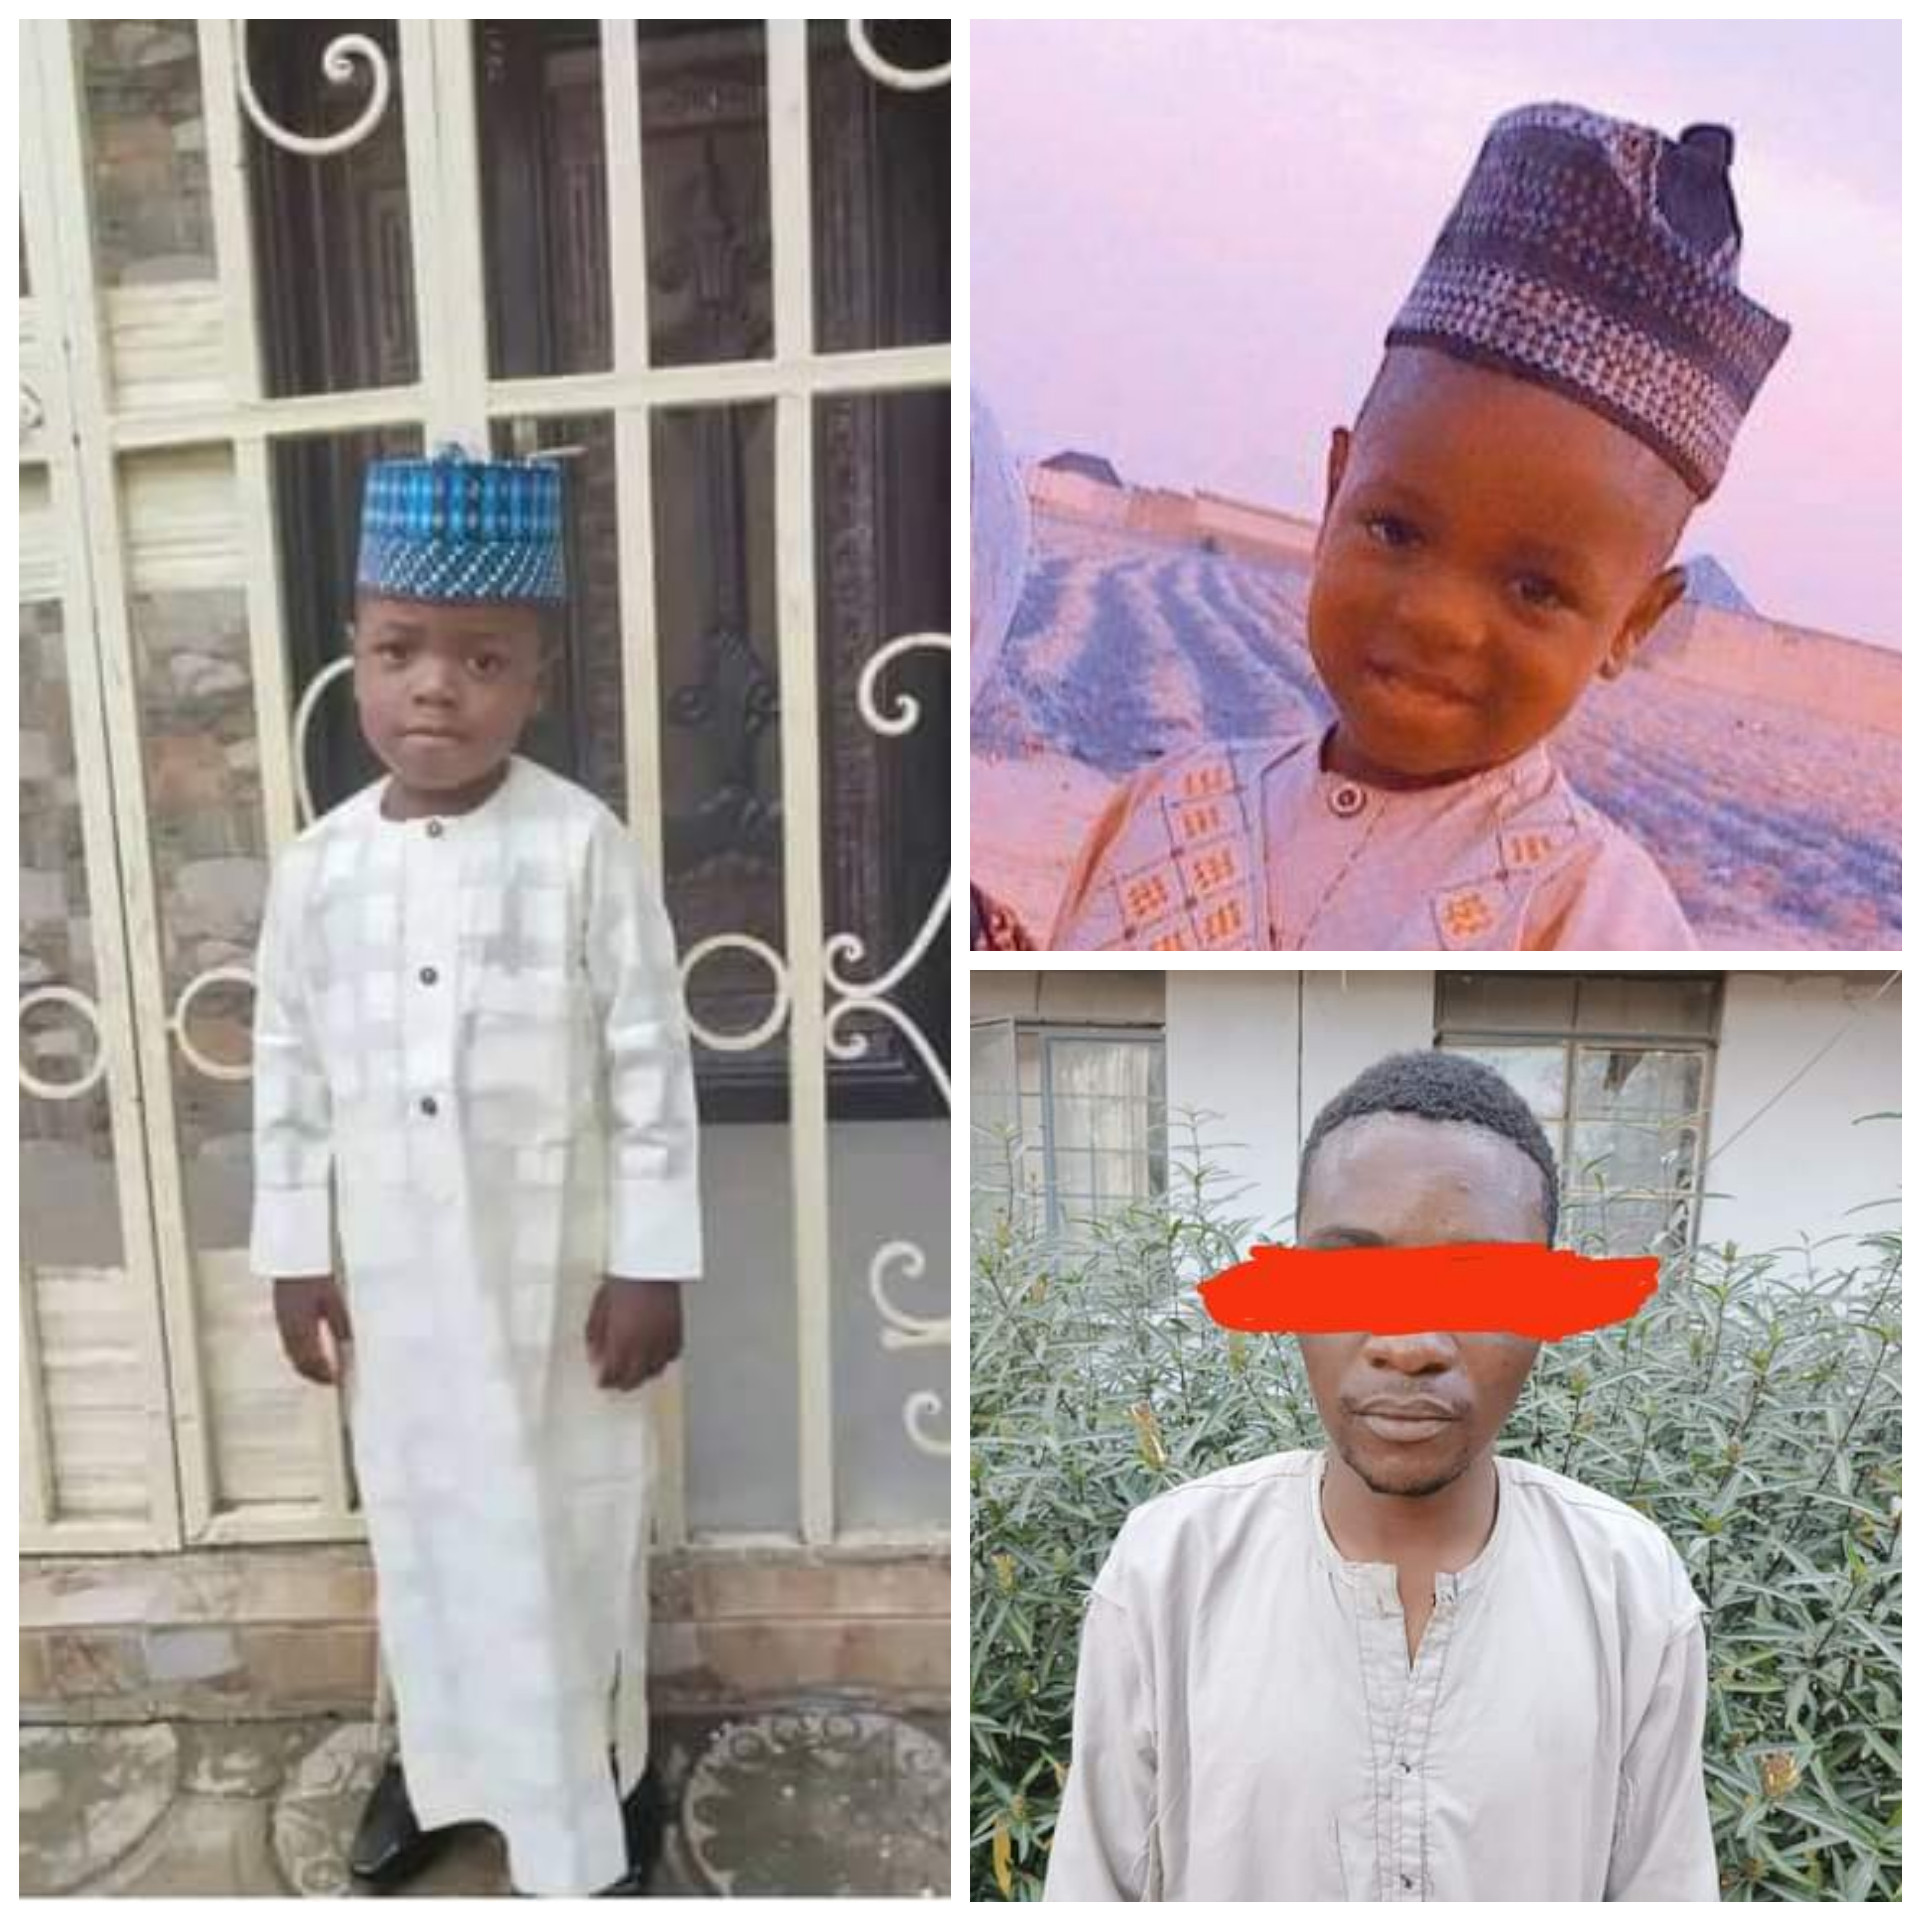 Four suspects arrested for kidnapping and killing five-year-old boy in Kano after collecting N5m ransom